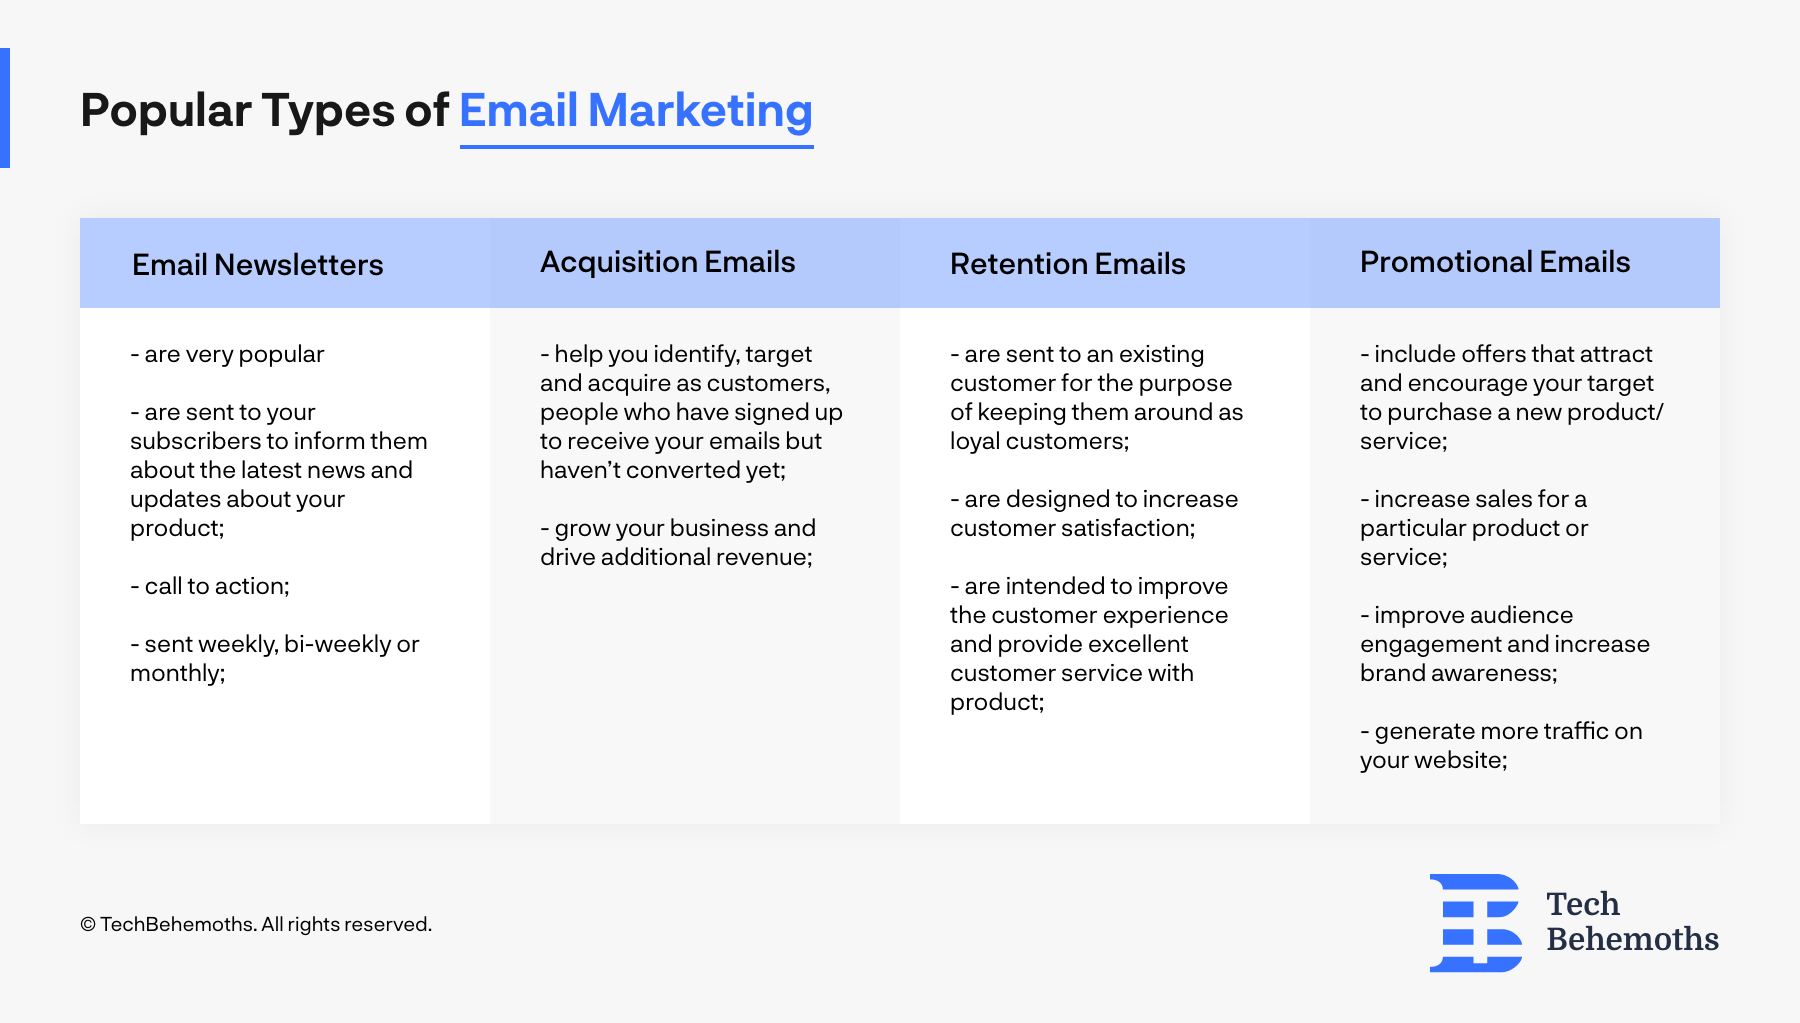 popular types of emails marketing